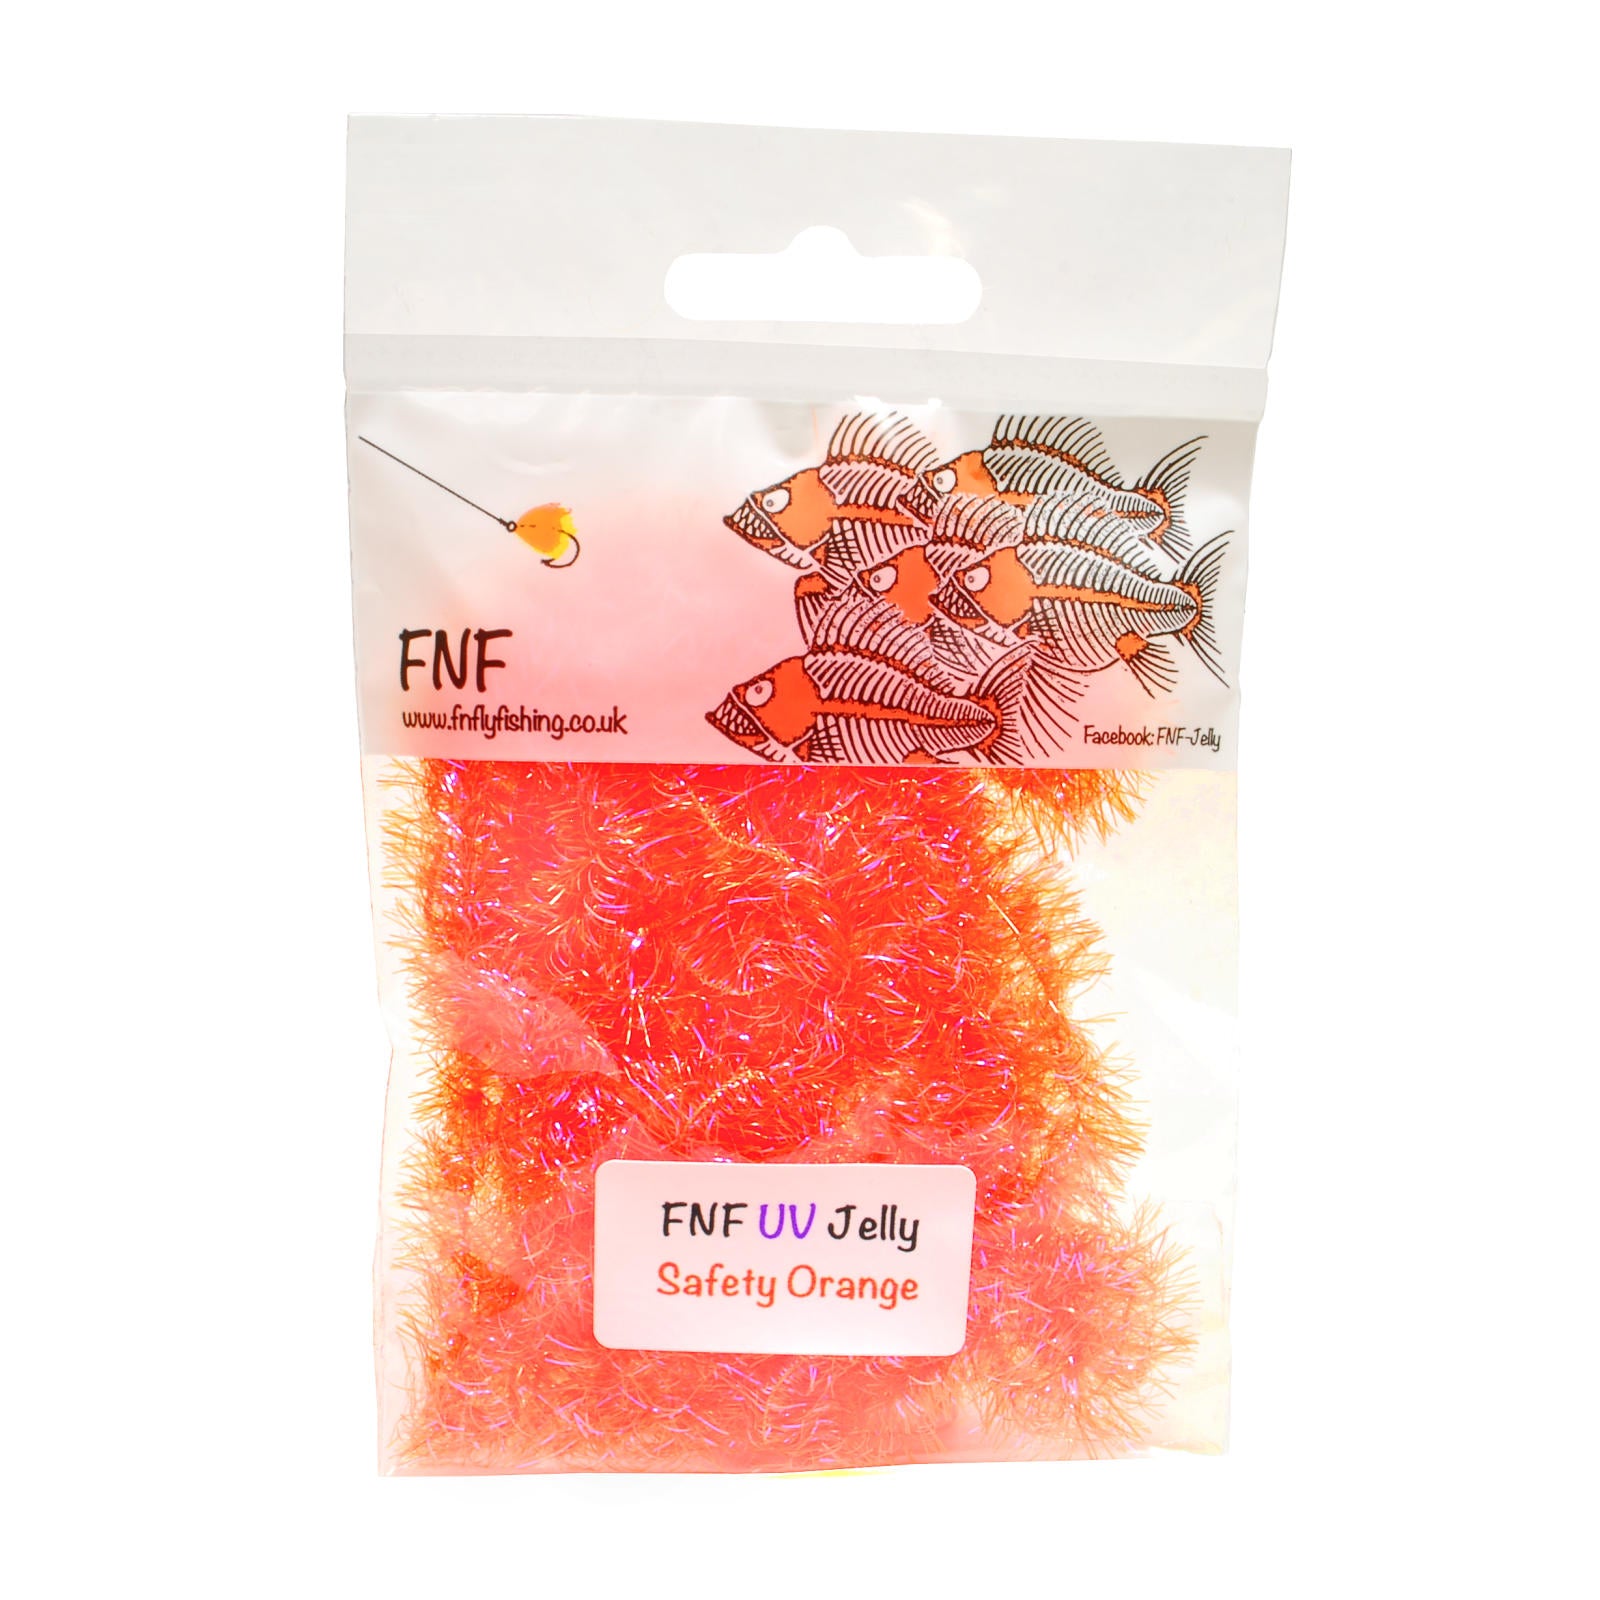 Frozen North Fly Fishing (FNF) Standard 15mm Fritz - Fly Tying